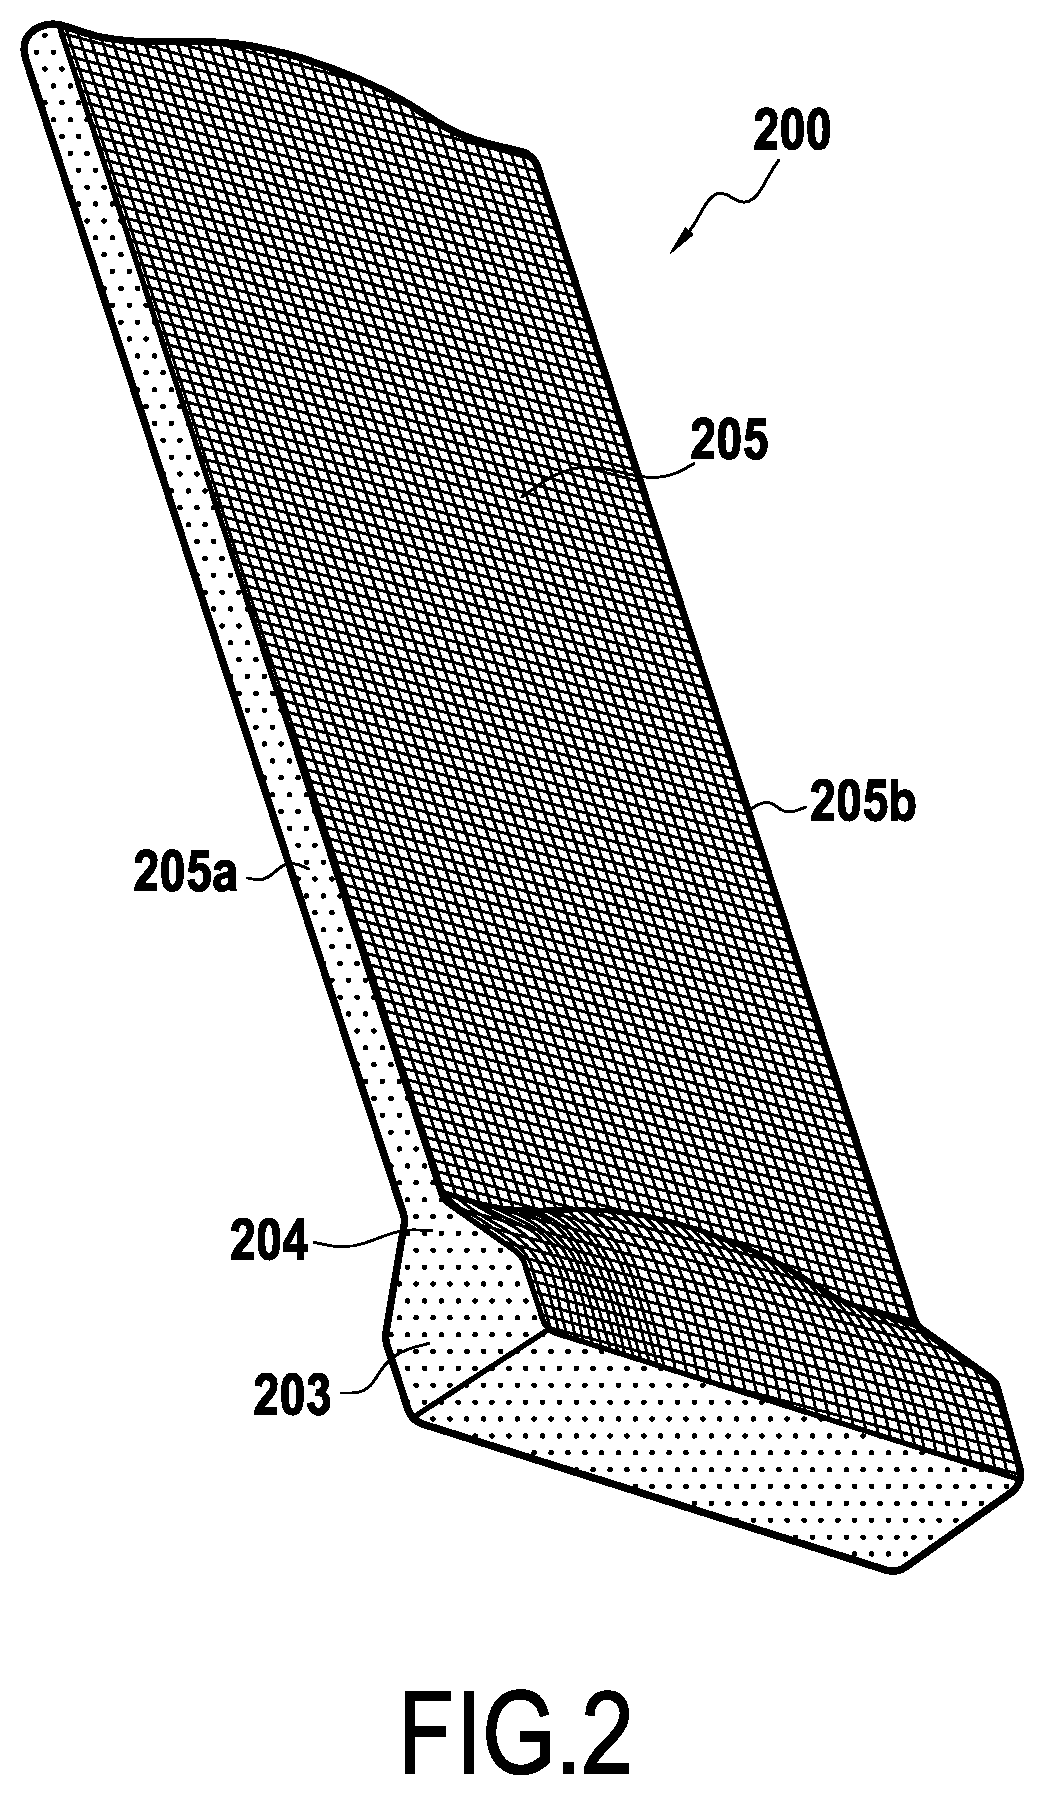 Method for shaping a fibrous preform by compacting in order to produce a composite material part